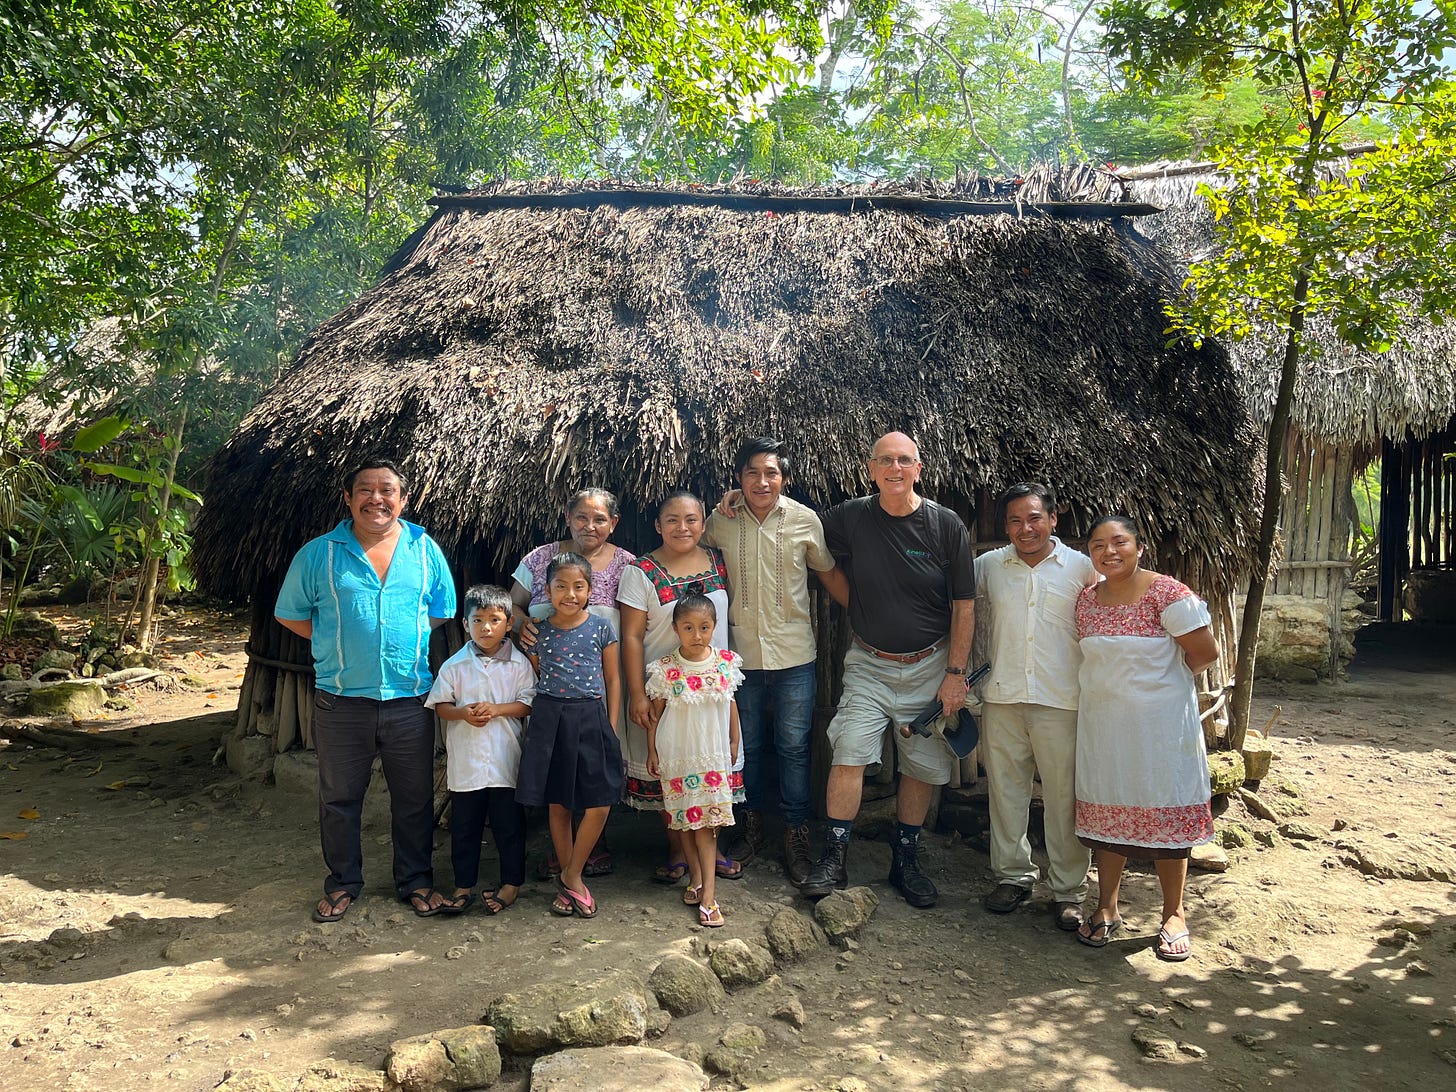 Multi-generational family, some in traditional dress, standing in front of their thatched roof home called a pilapa.